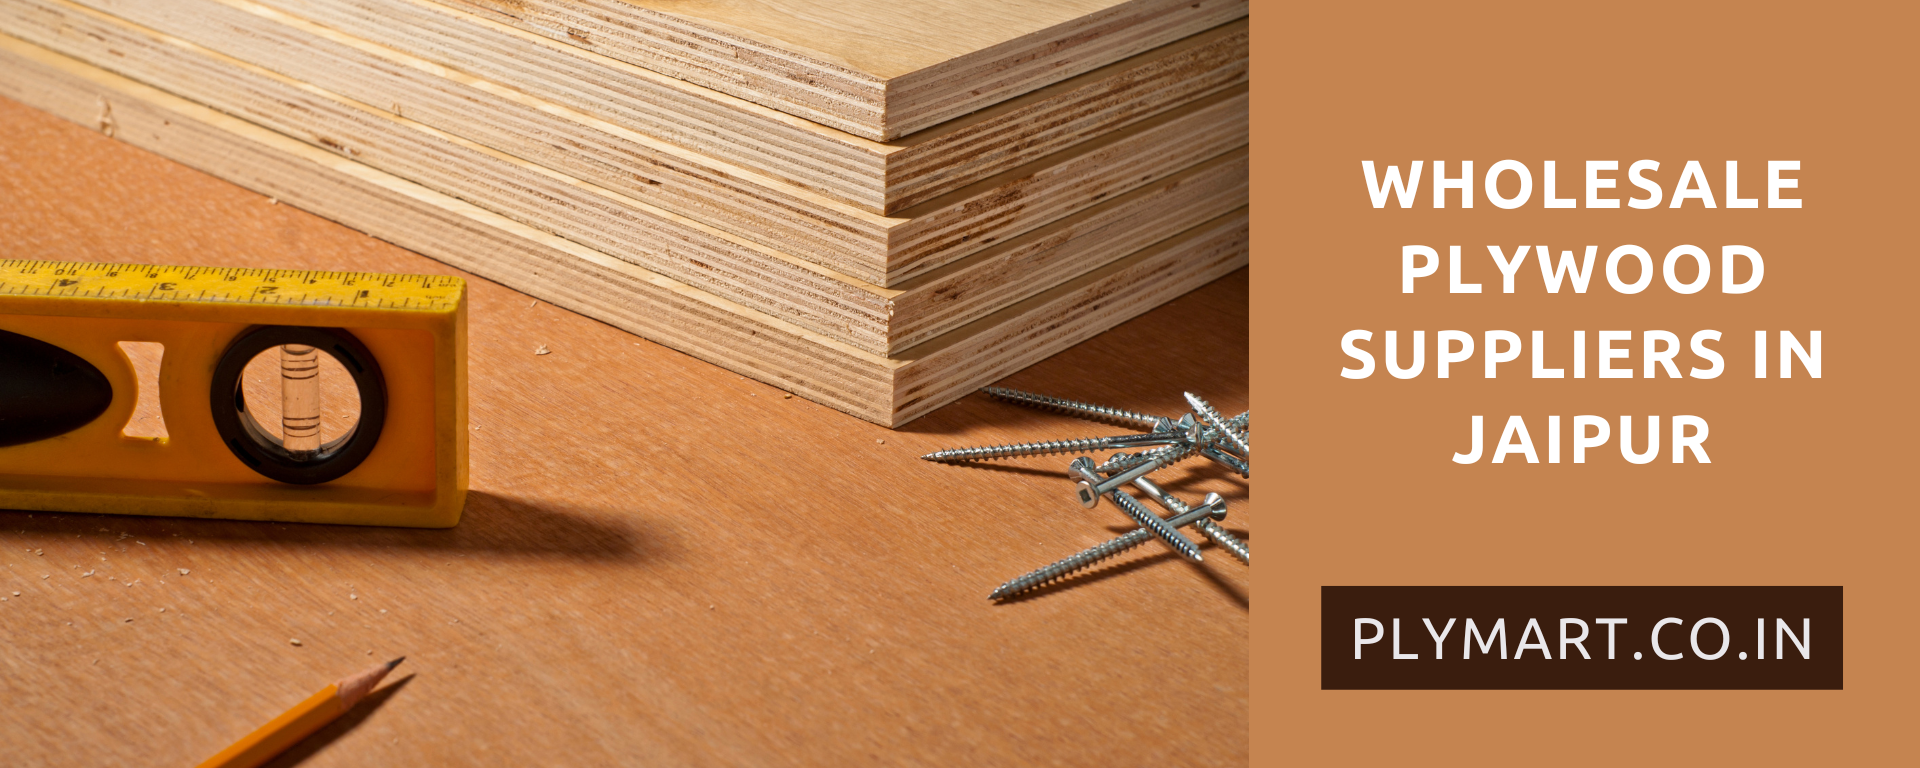 Wholesale plywood suppliers in Jaipur